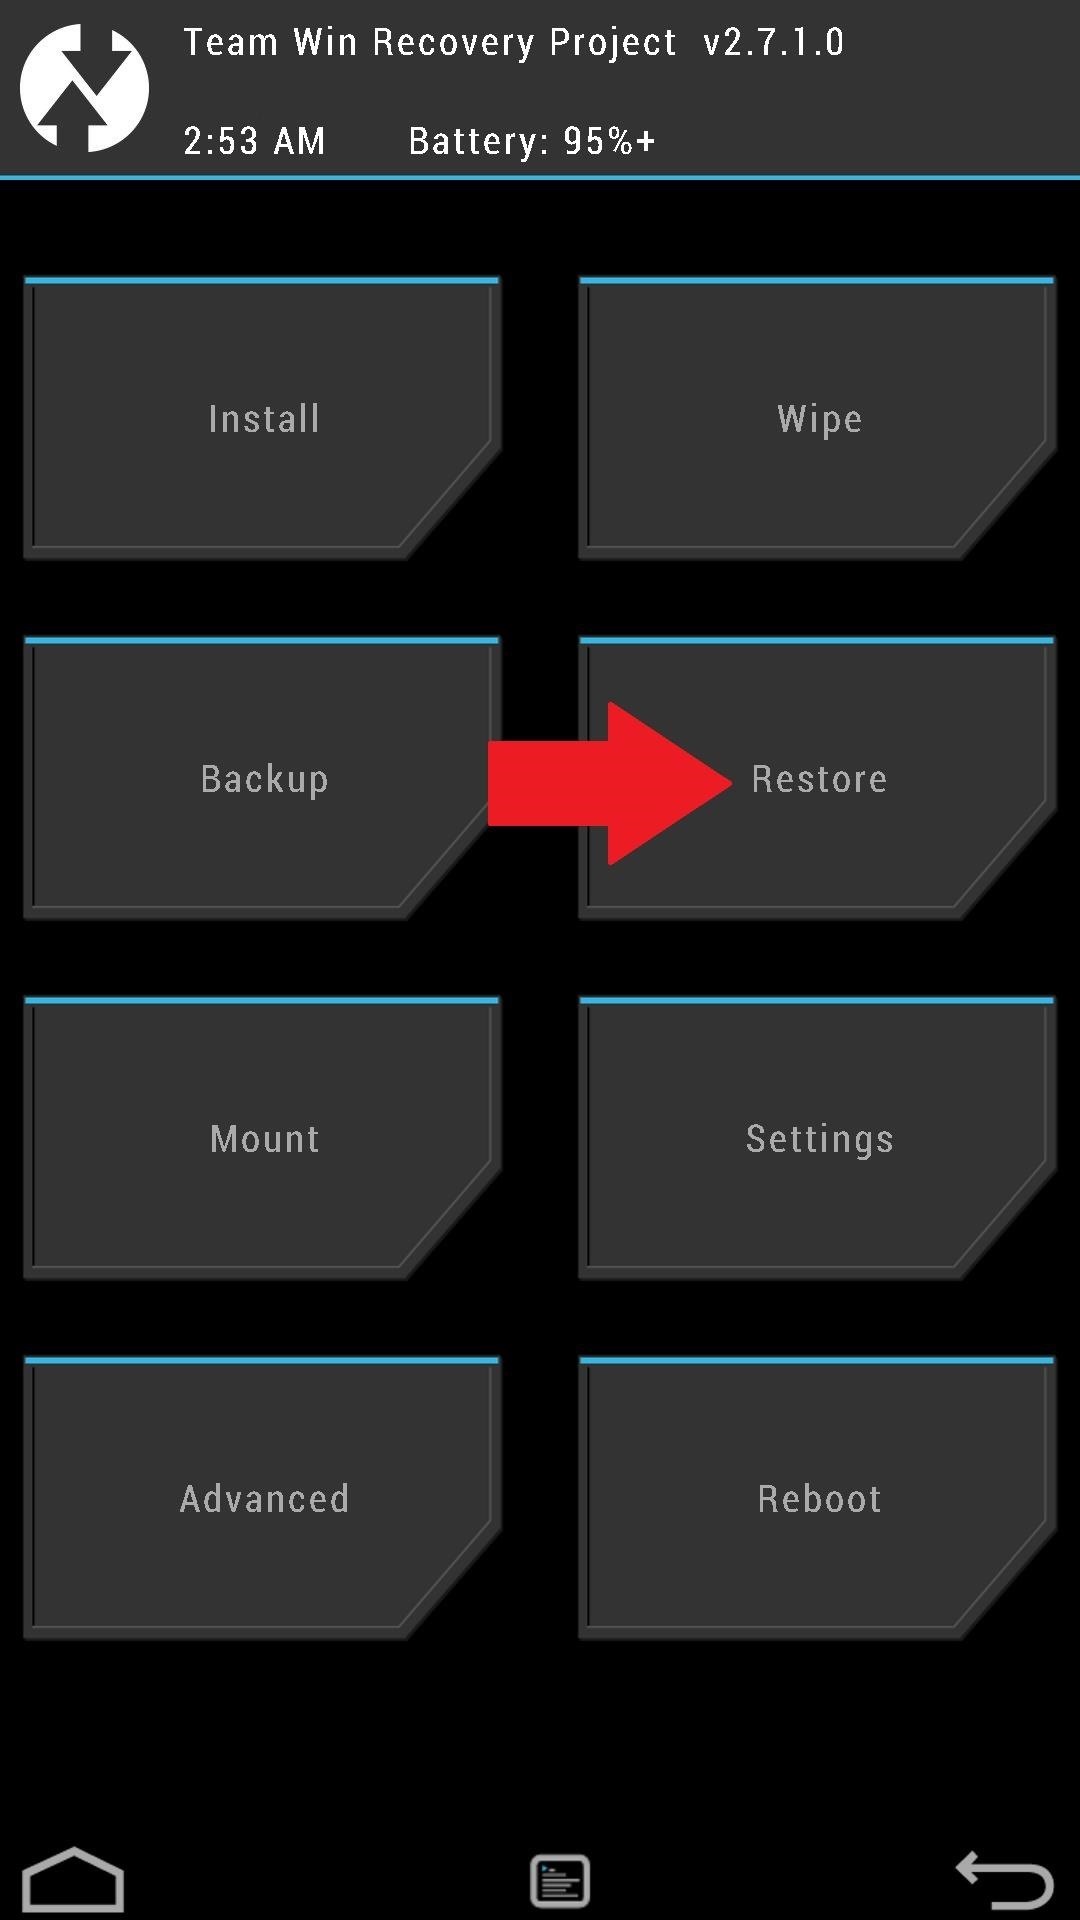 How to Install TWRP Recovery on Your Samsung Galaxy Note 3 (Sprint or T-Mobile)